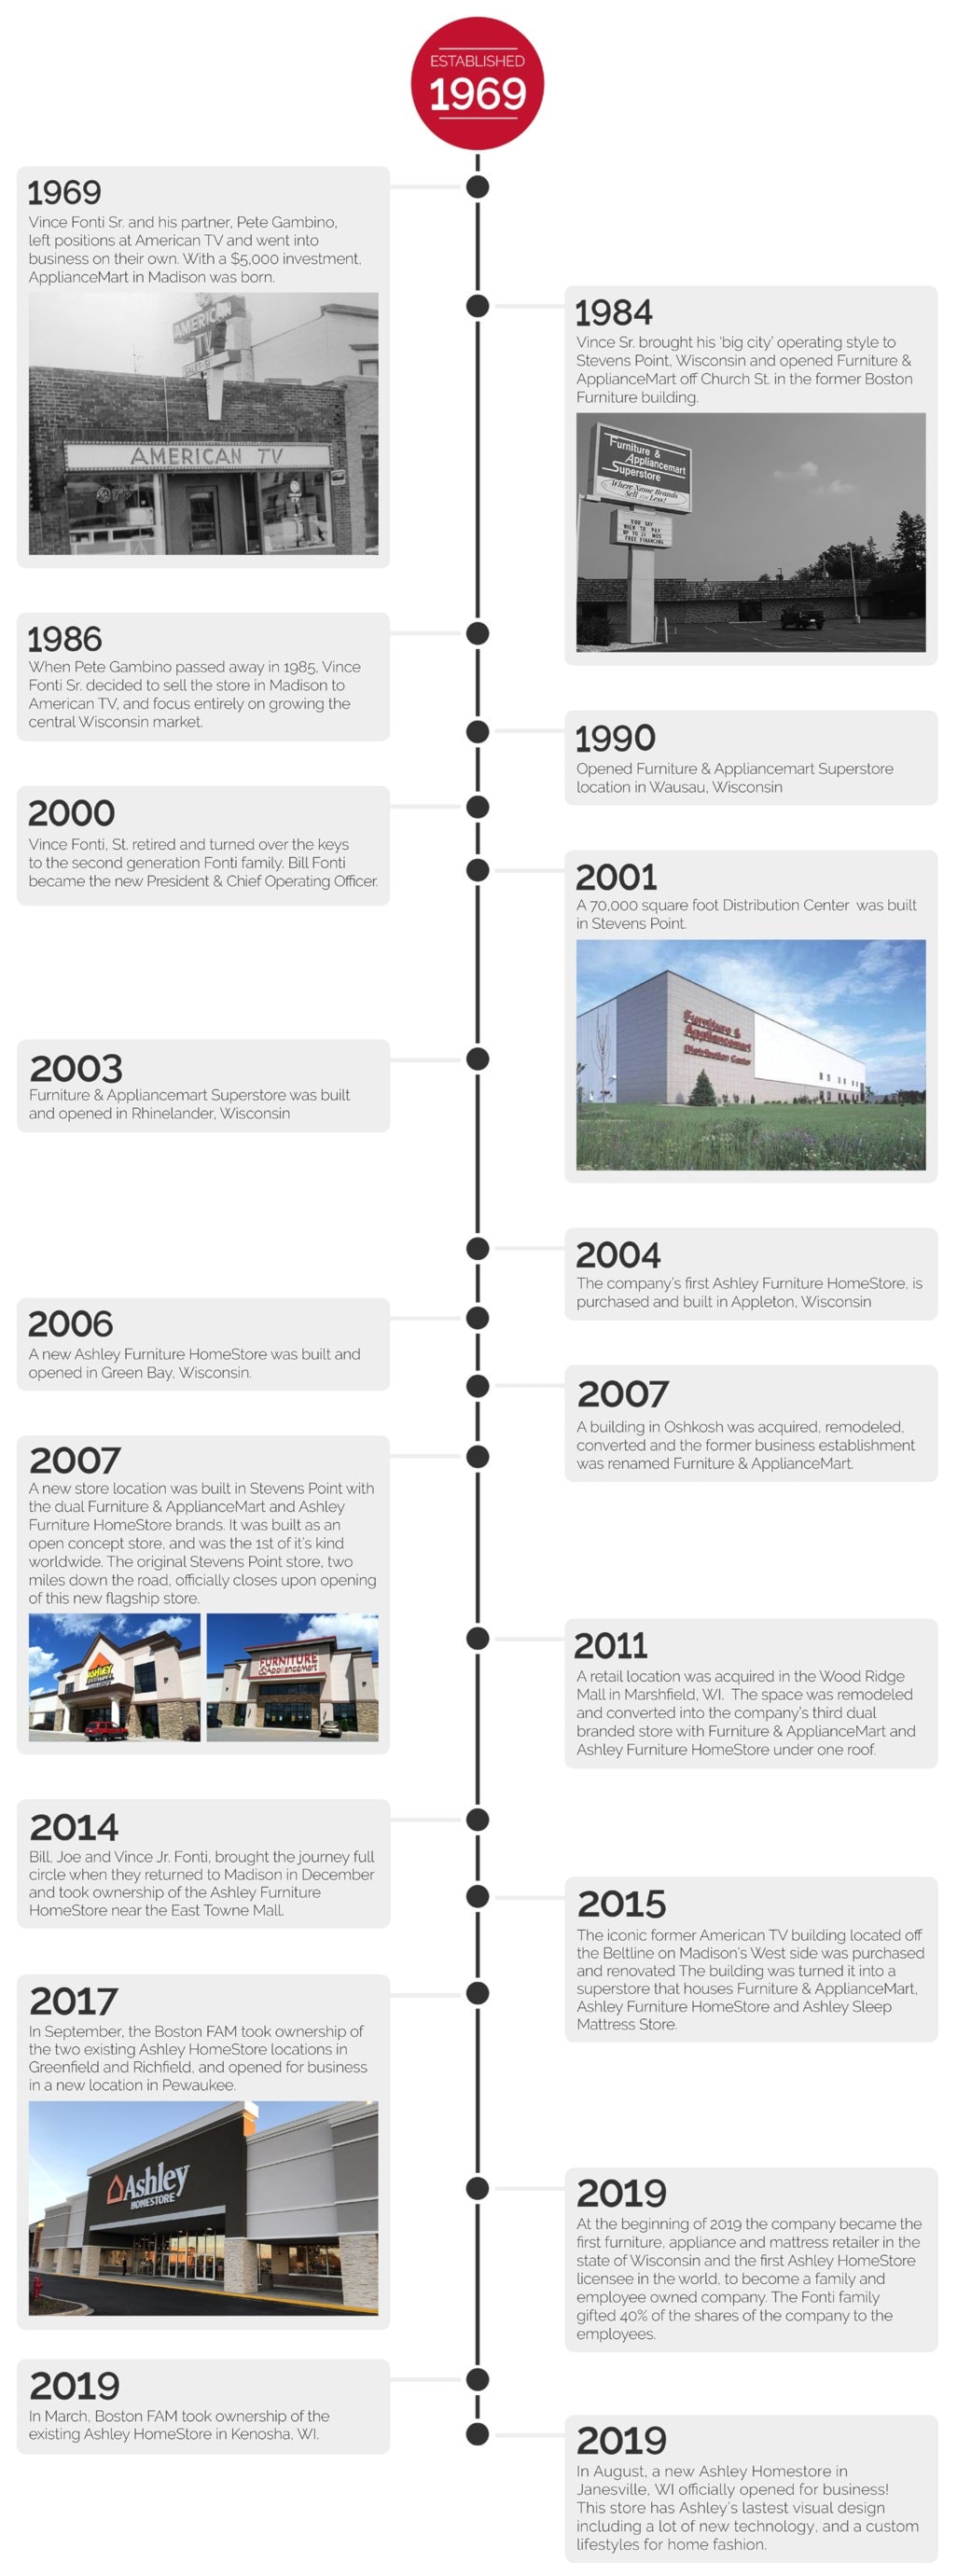 Timeline of Furniture and ApplianceMart's history, starting in 1969